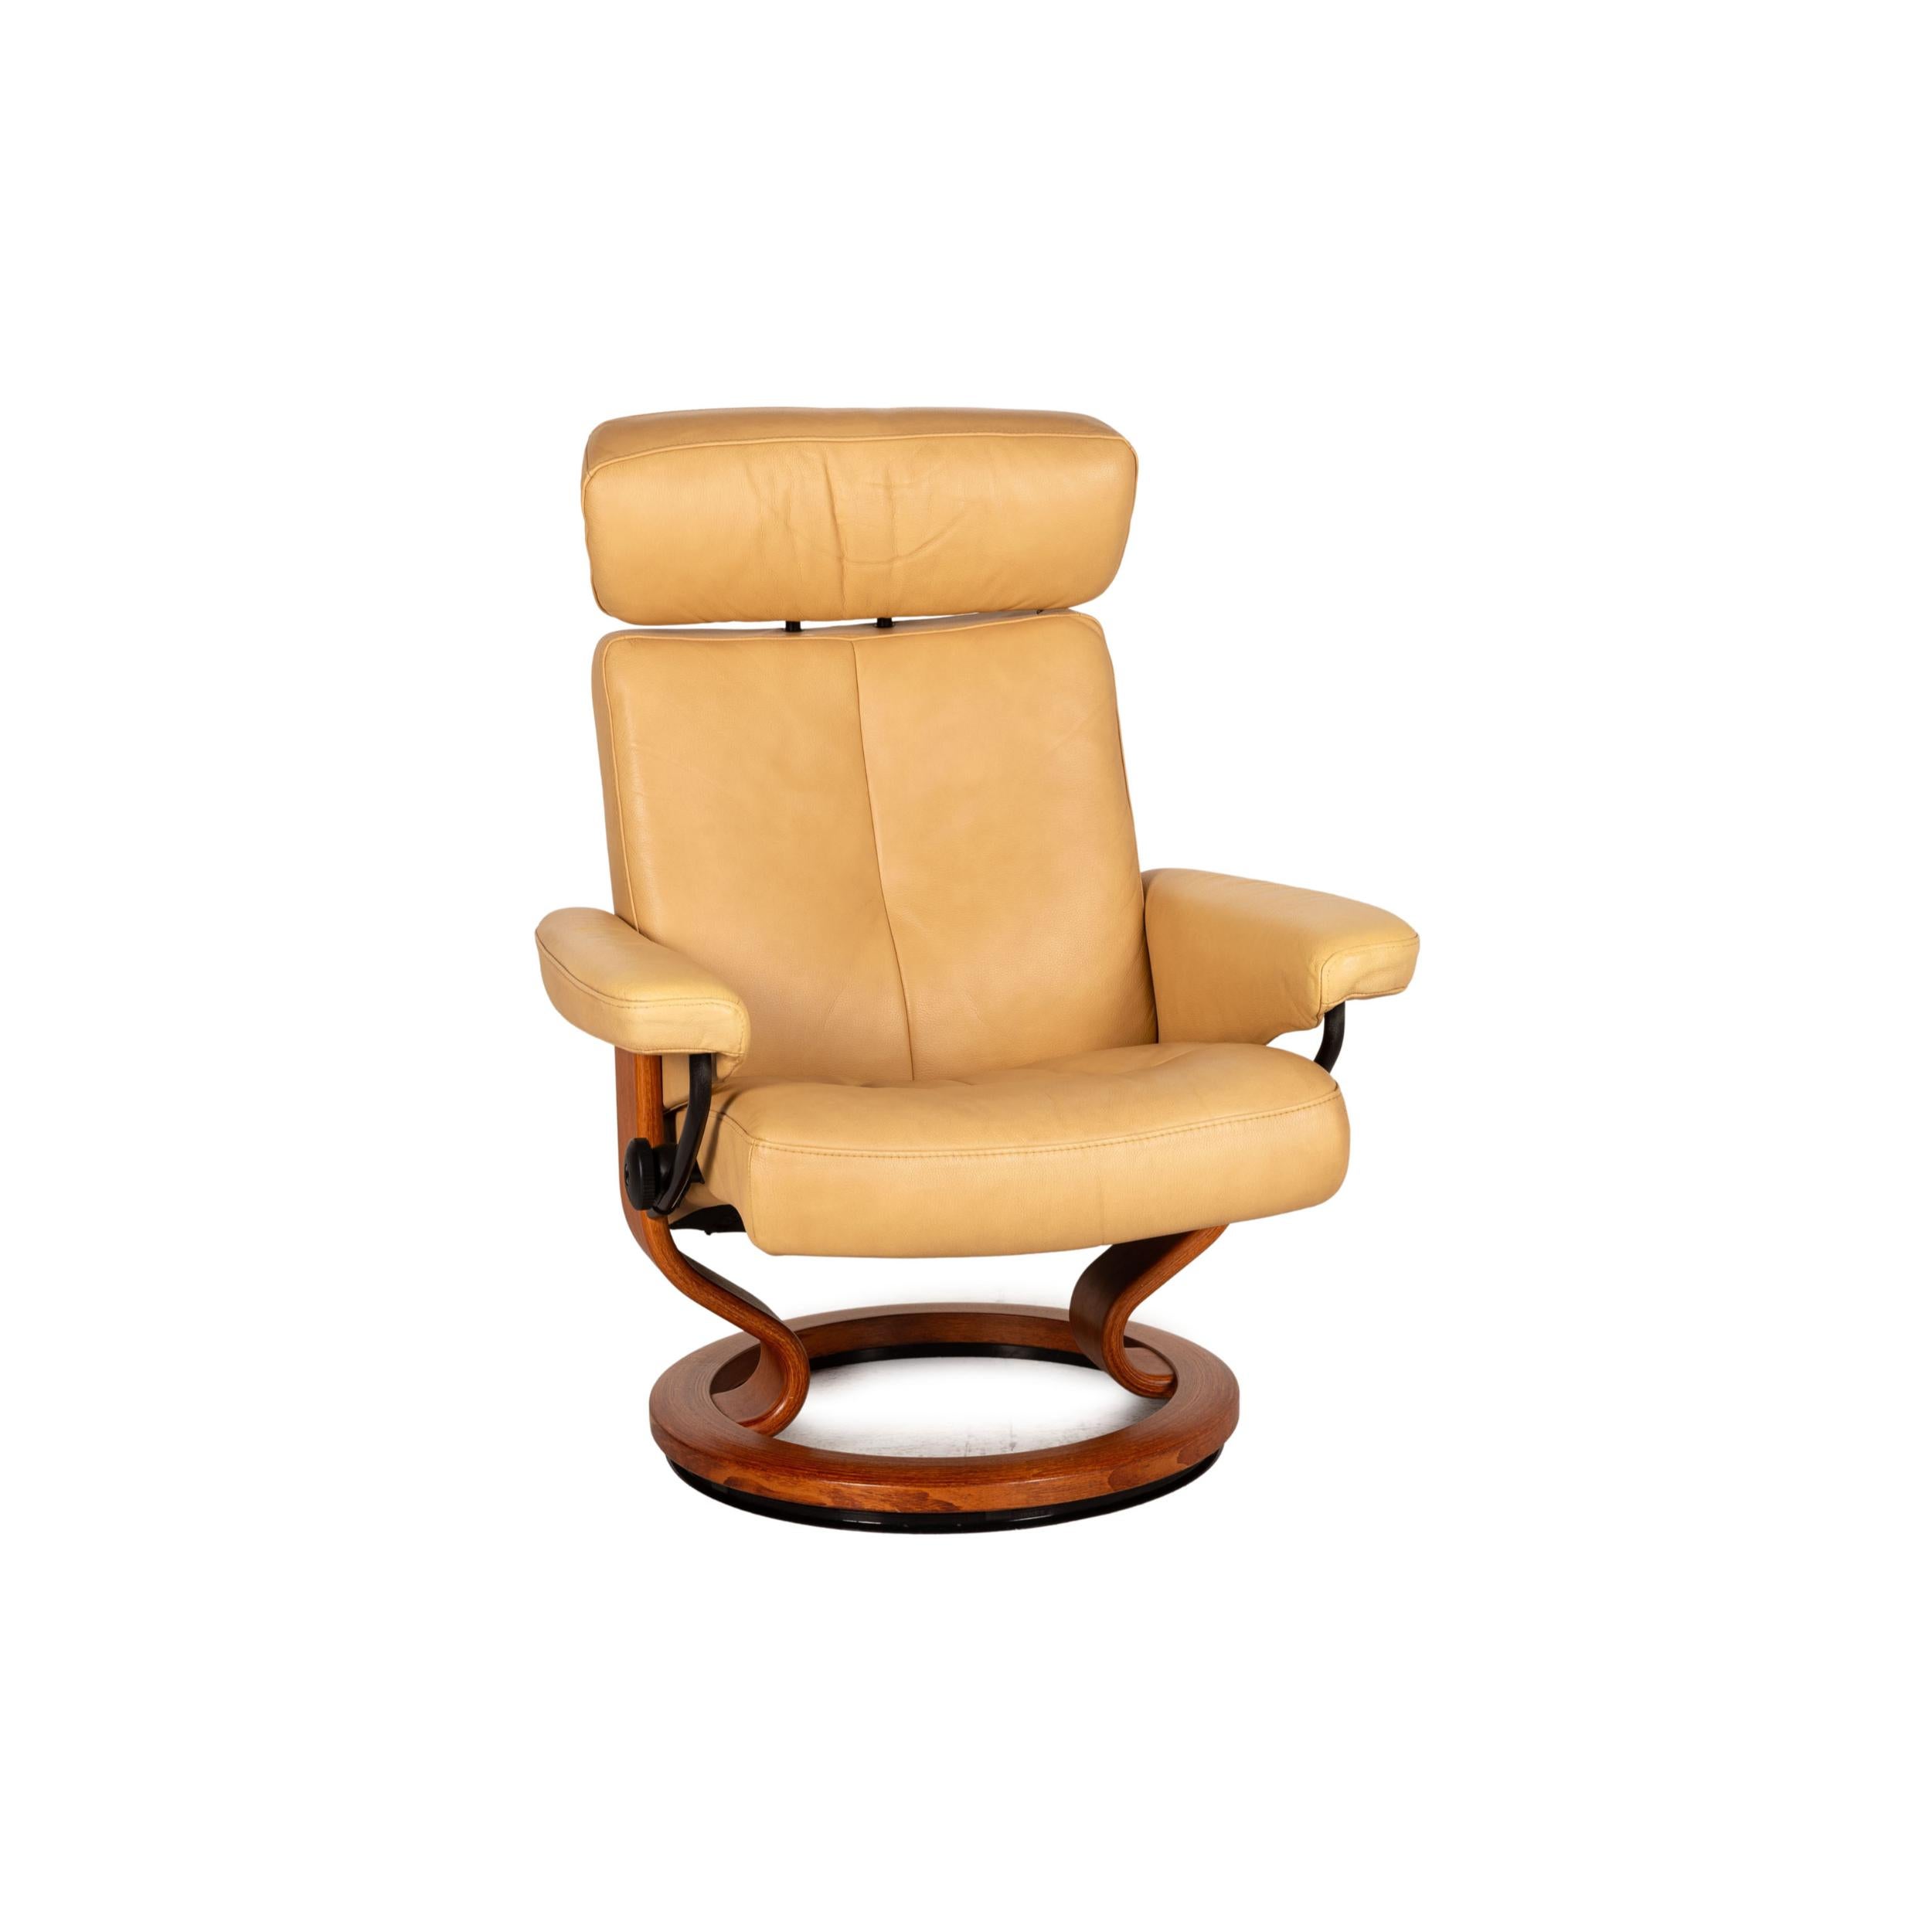 Stressless Orion Leather Armchair Beige Incl. Stool Function Relaxation Function For Sale 1